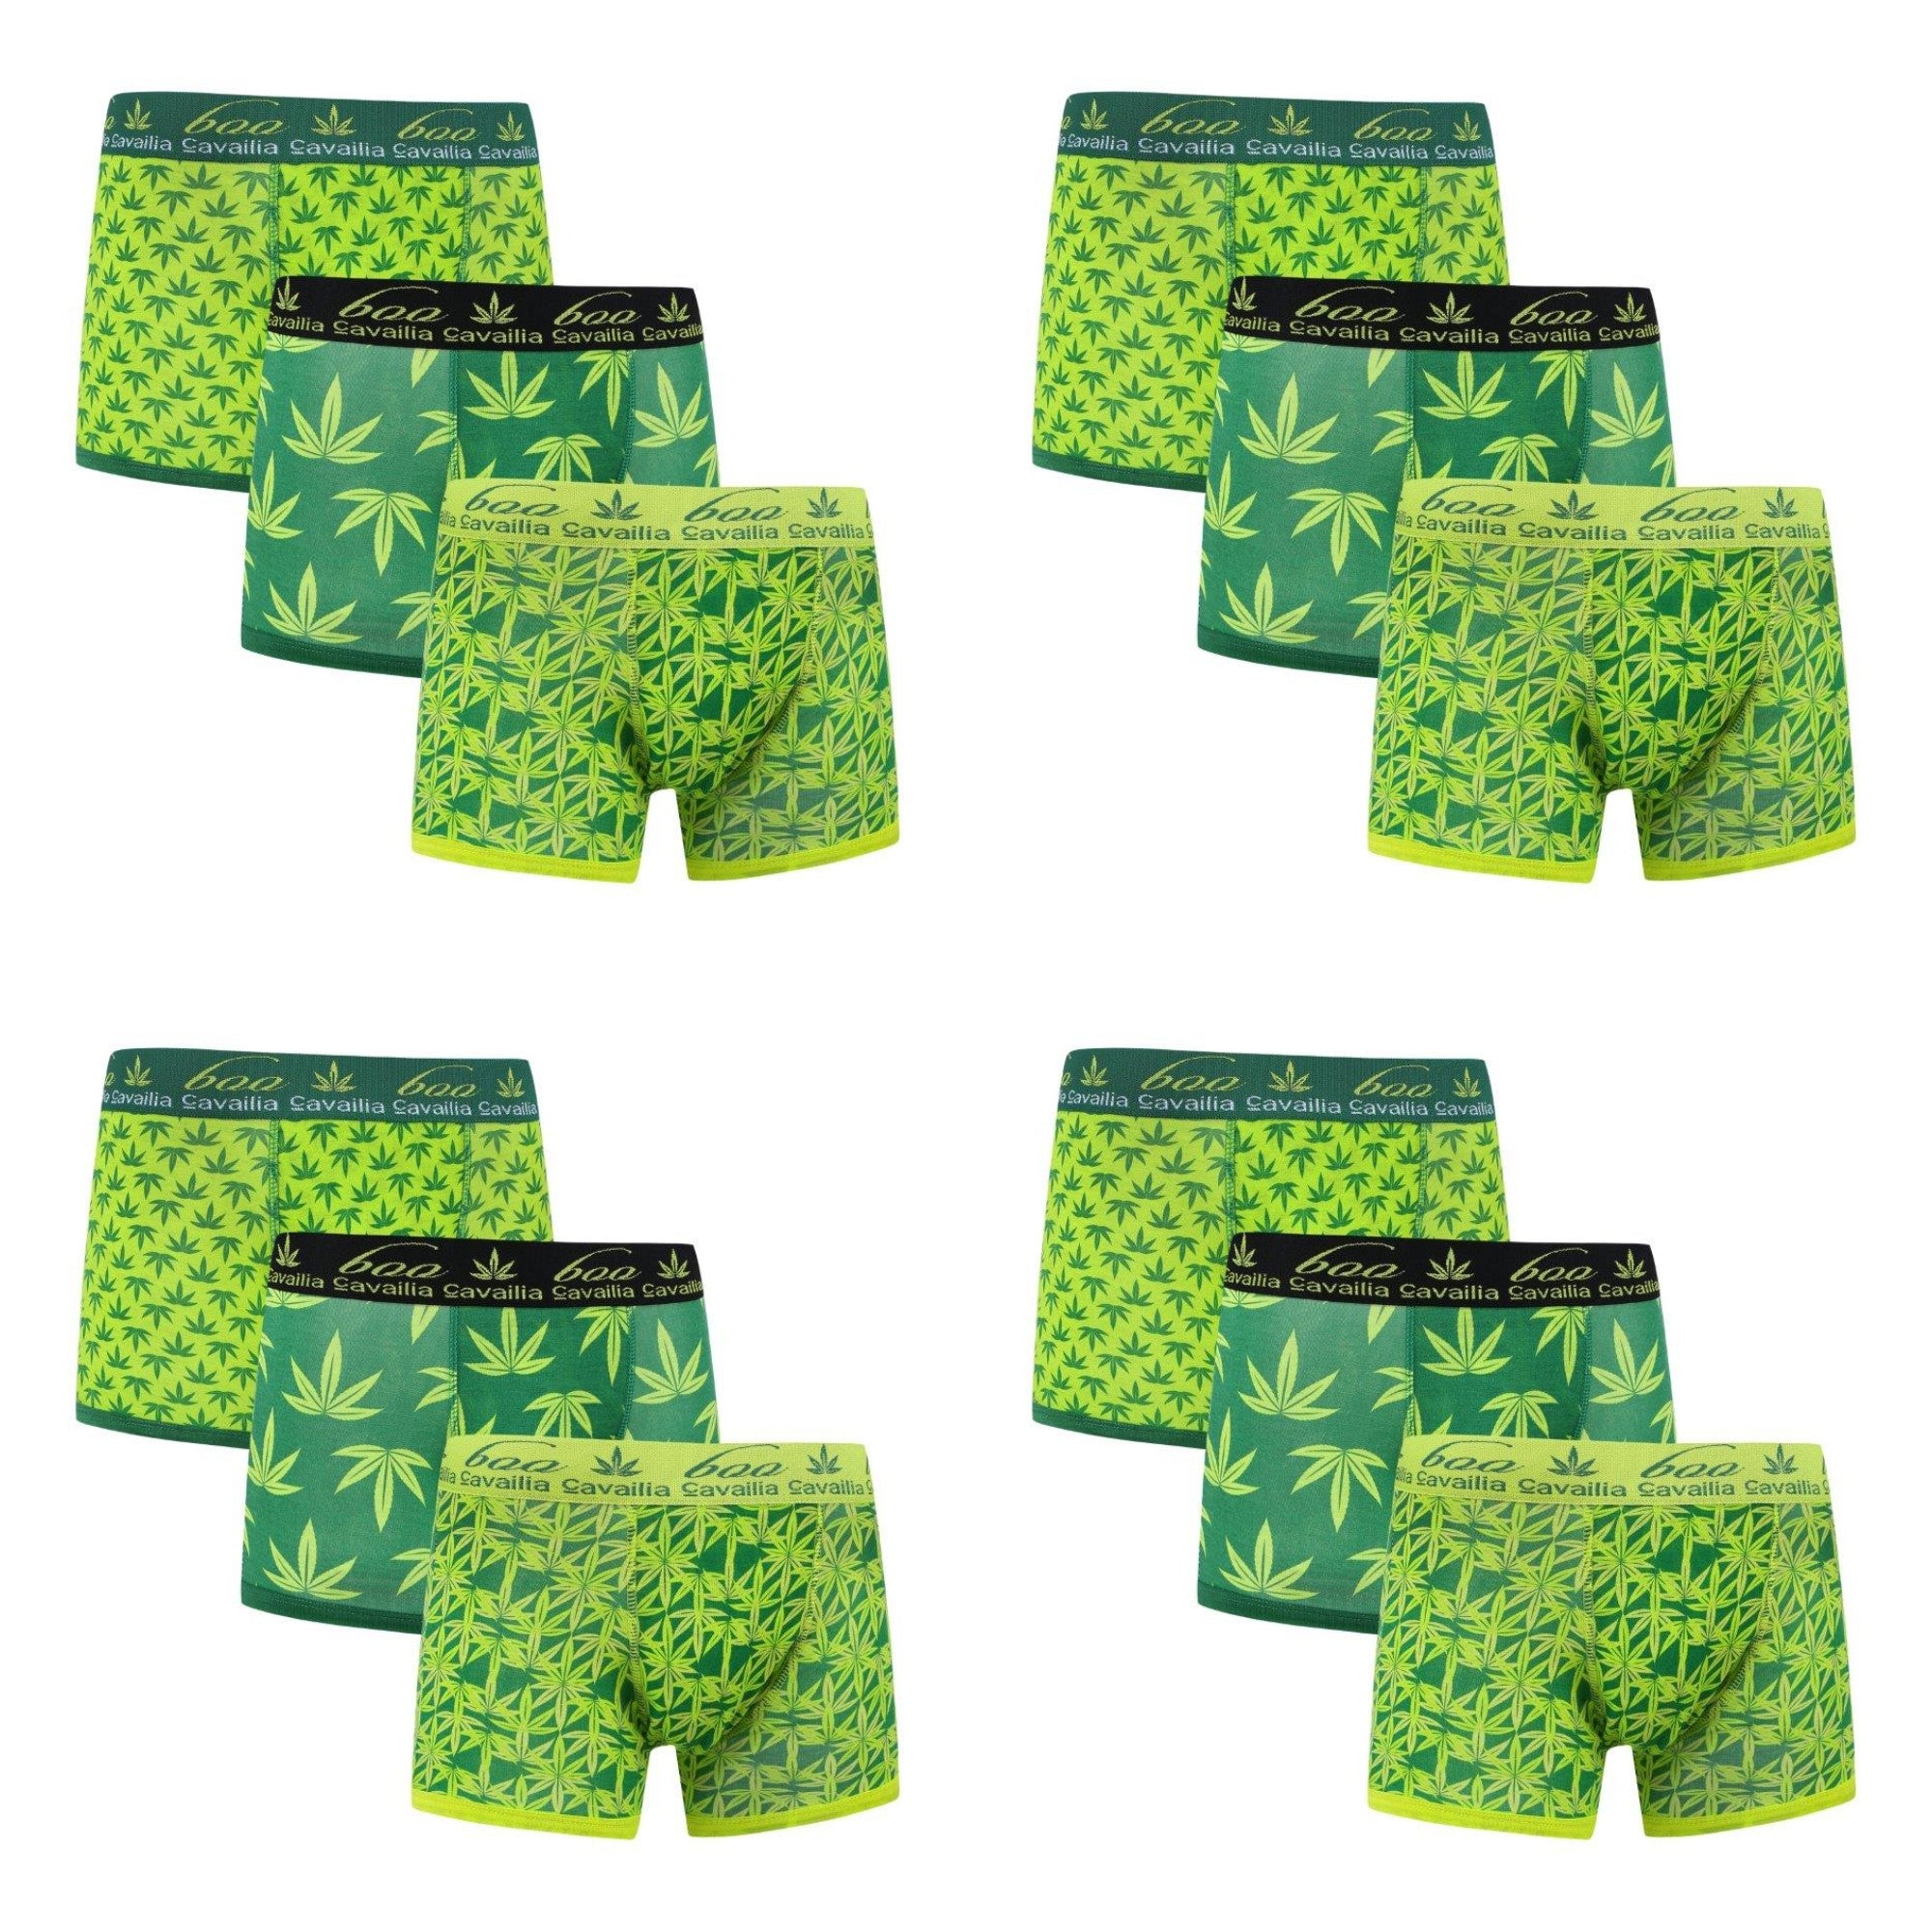 Custom Dolphin Boxer Shorts With Colorful 3D Art And High Quality